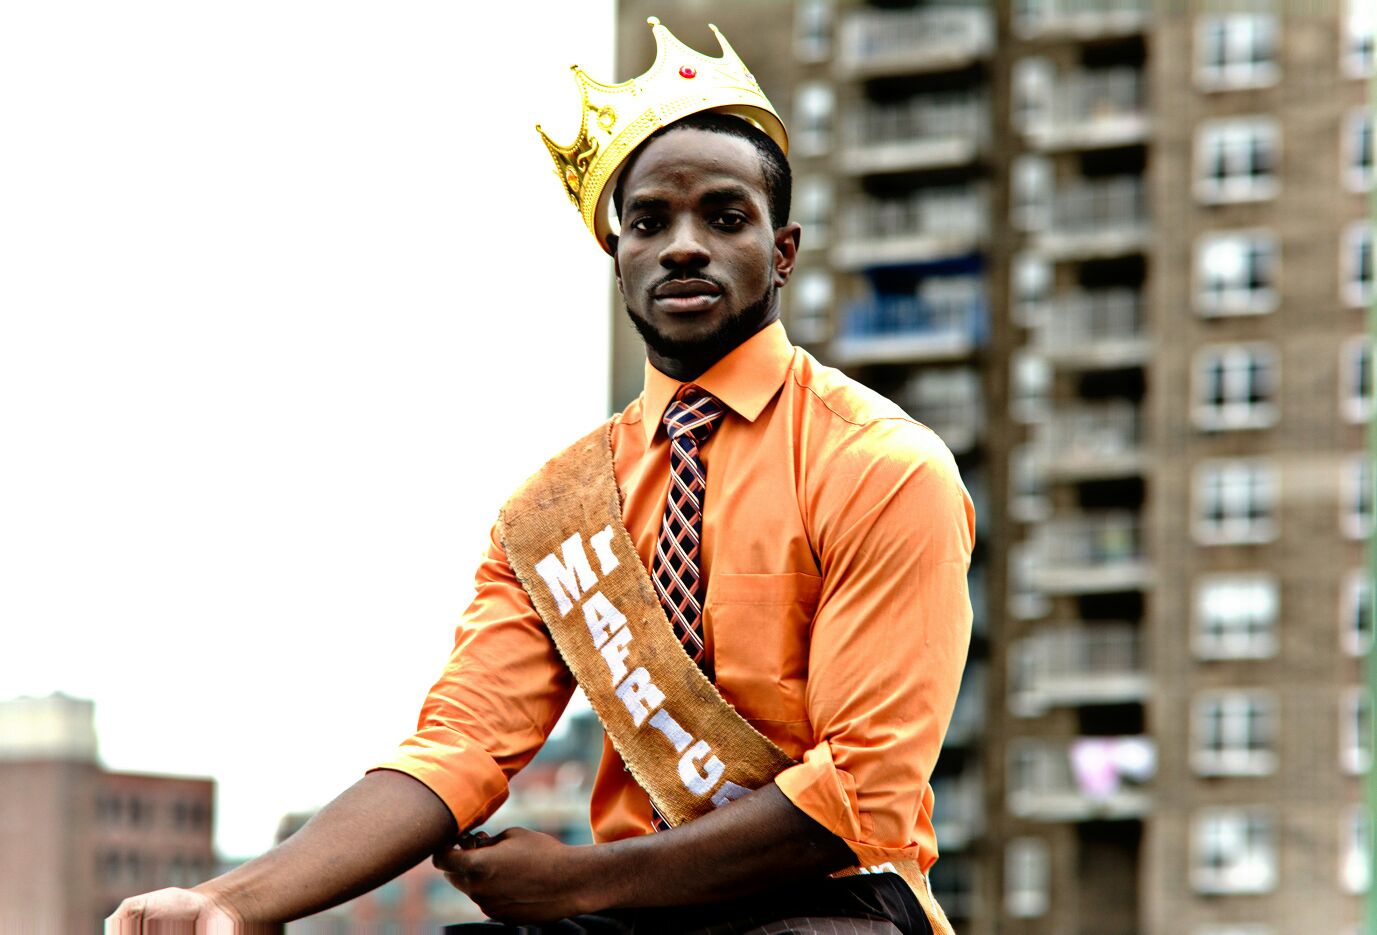 You are currently viewing Mr. Africa USA 2016 Erwan Smith Obone Joins The Royal Court For The Coronation of The Next Miss Africa USA On Nov 5th At Howard University, Washington DC